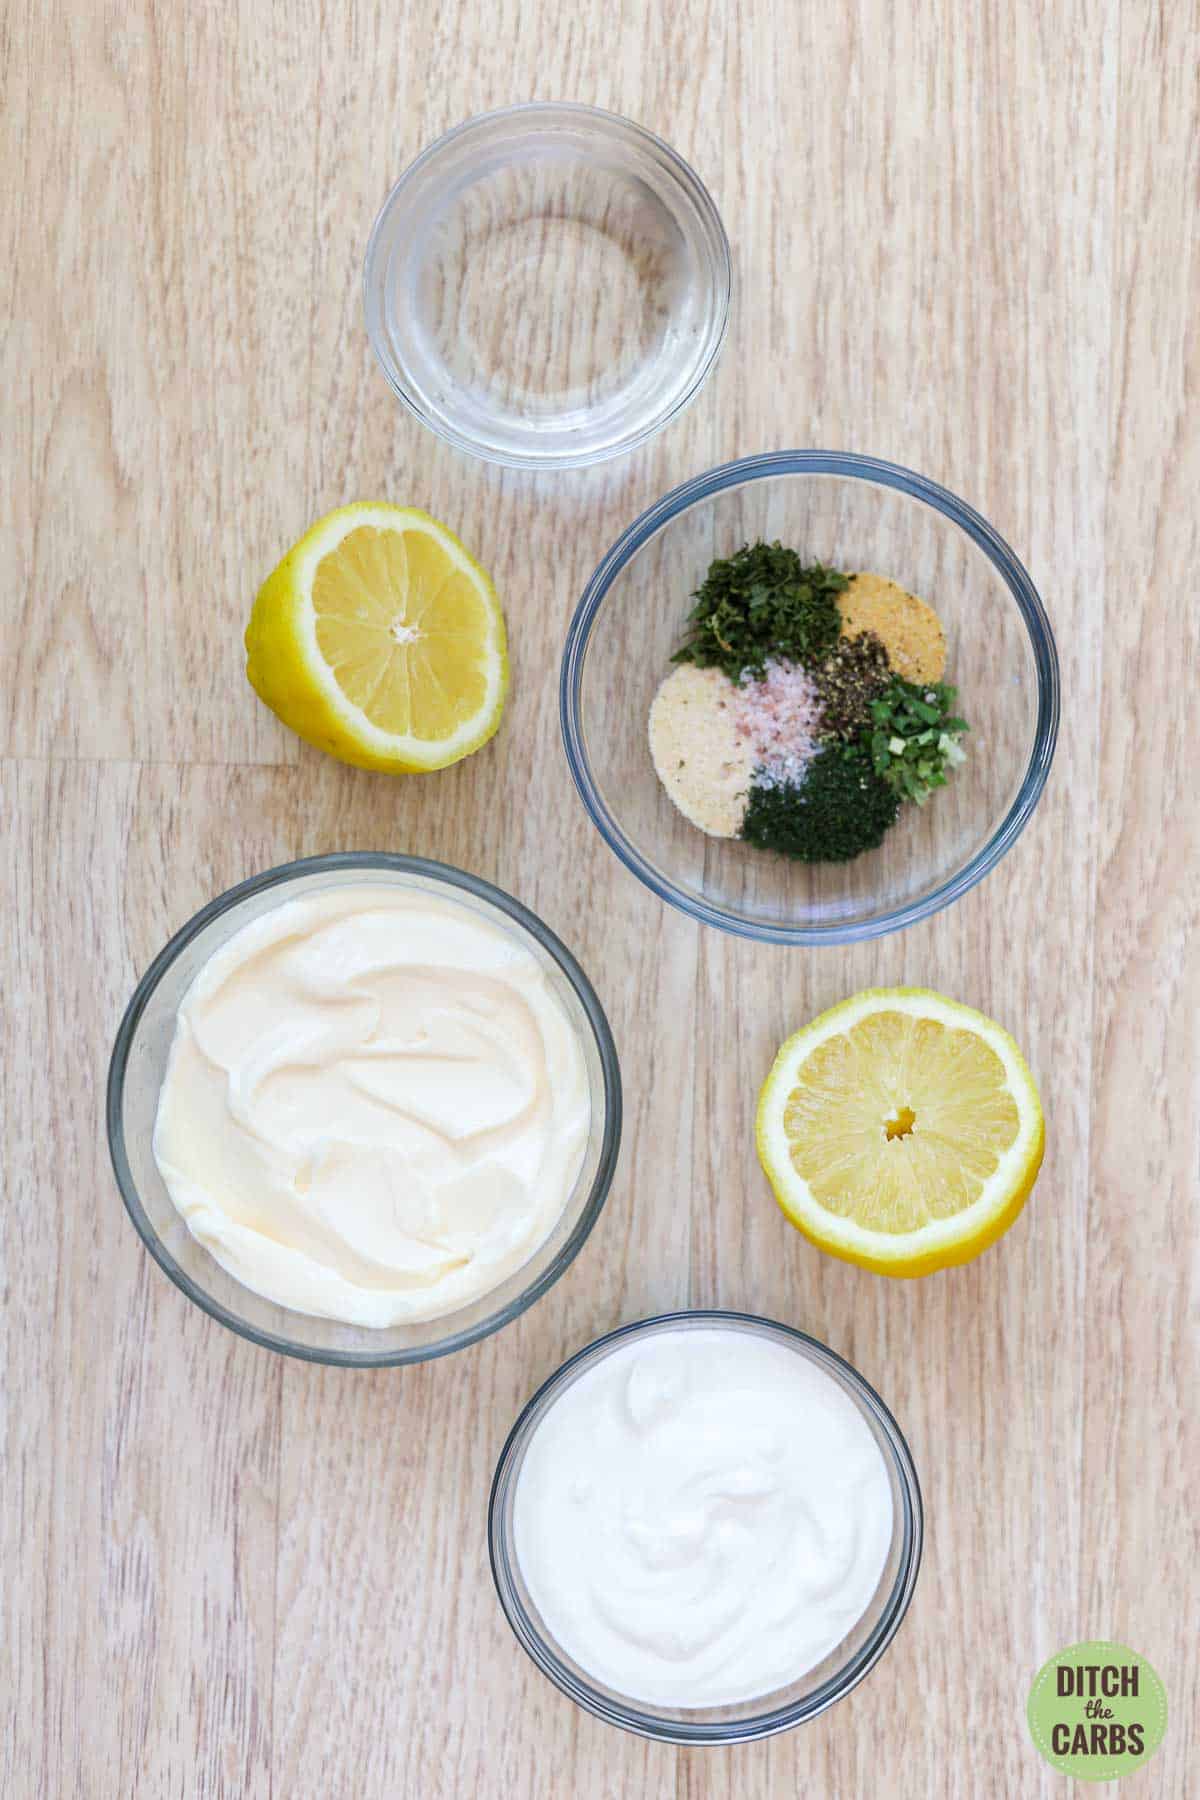 All the ingredients needed to make keto ranch dressing in measured and placed in clear glass bowls on the counter.